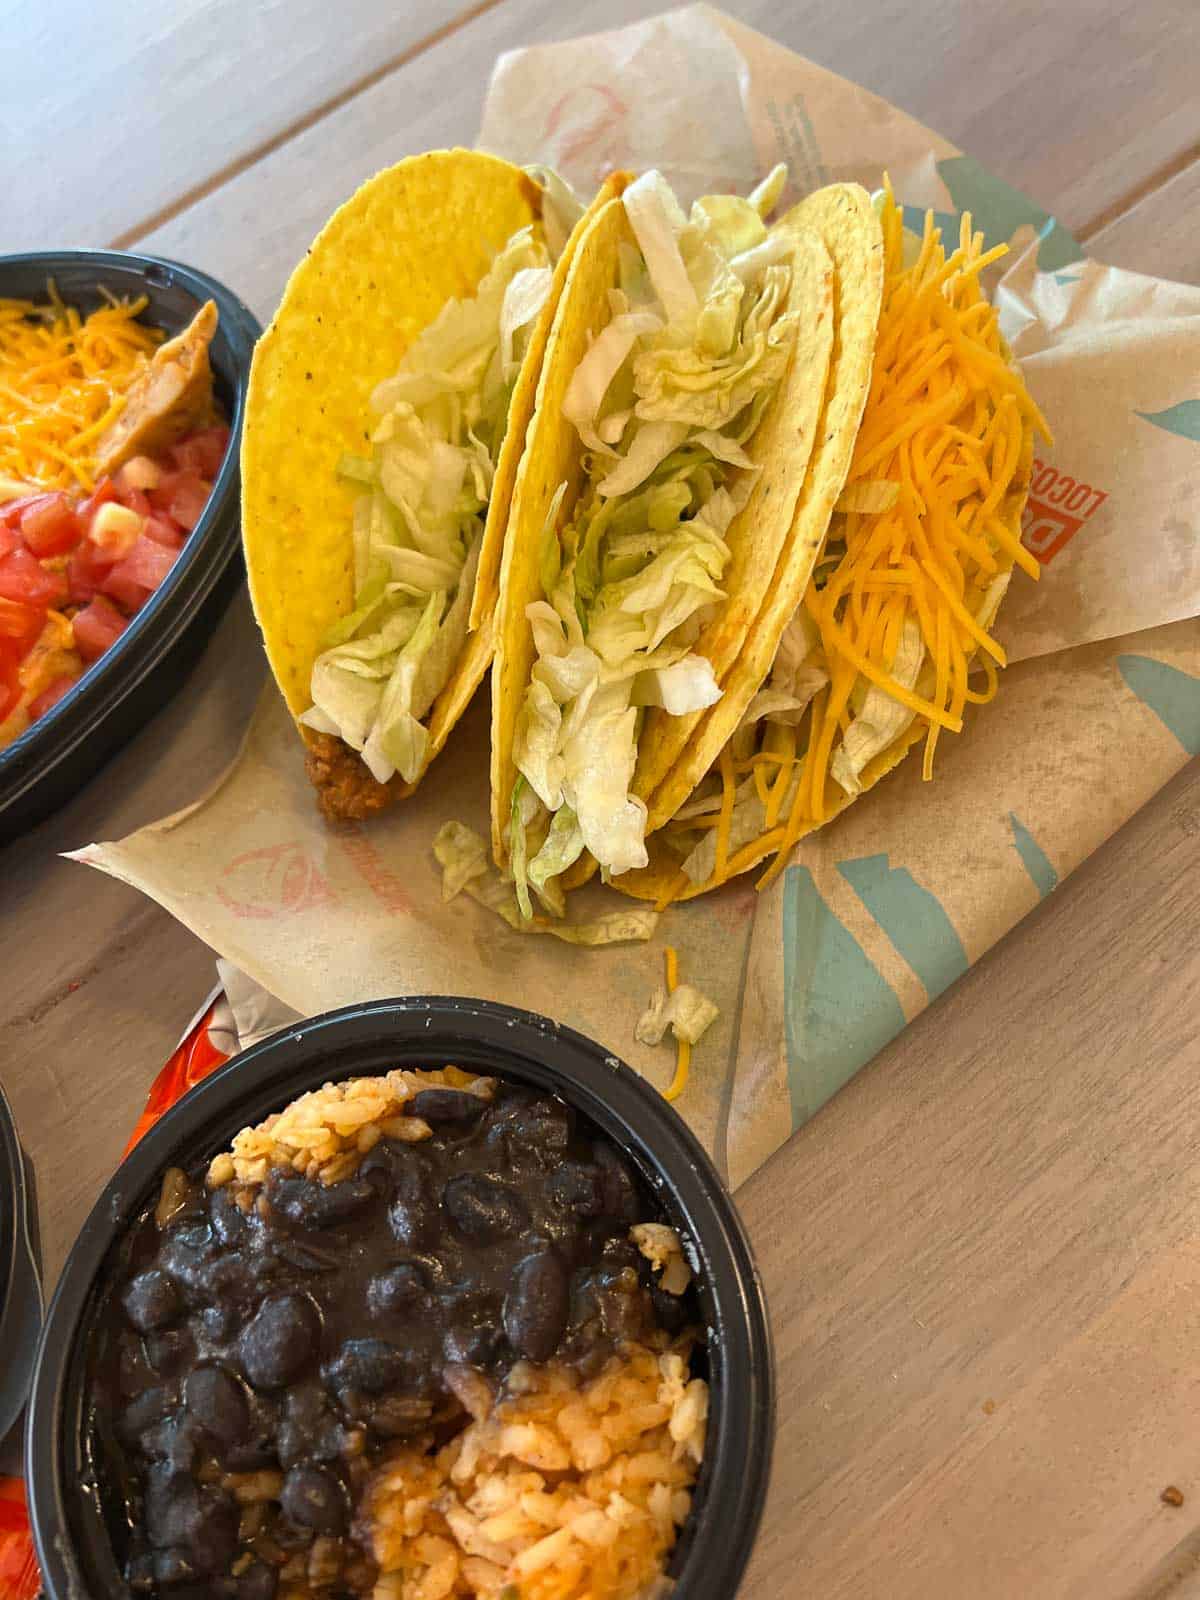 crunchy tacos and beans from taco bell